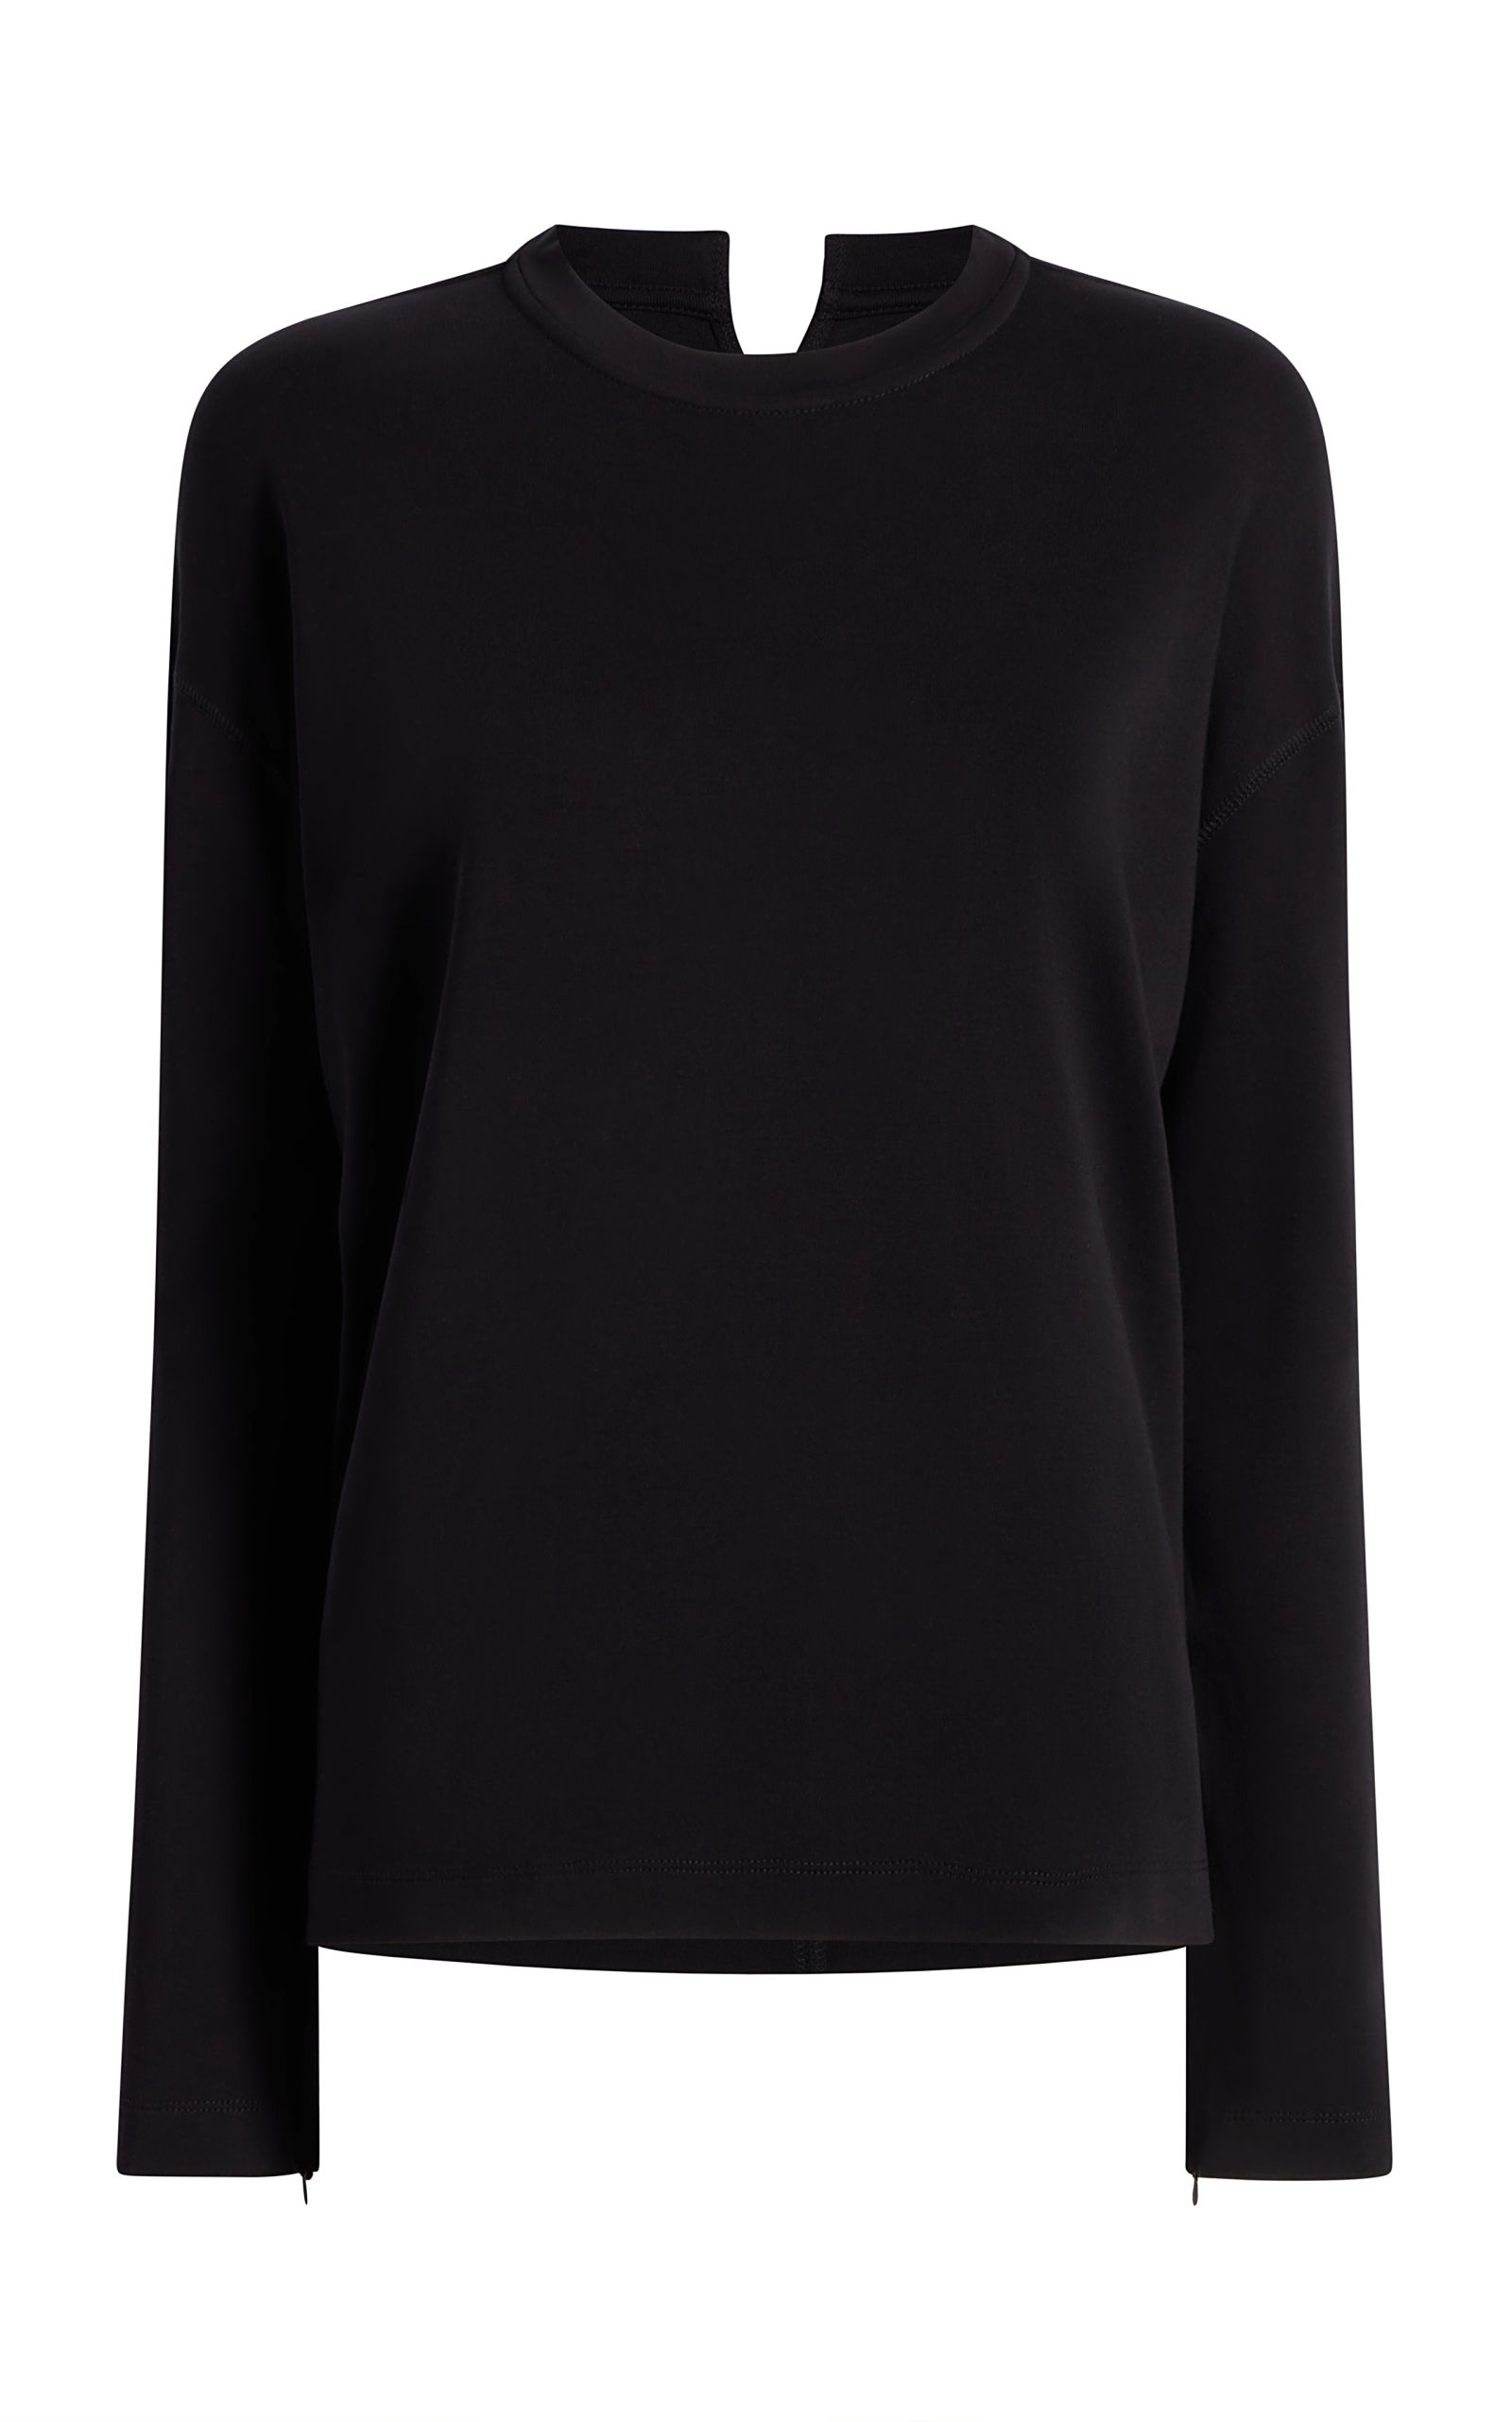 LUXE SEAMED LONG SLEEVE BLACK A123CT036-CO-BLK